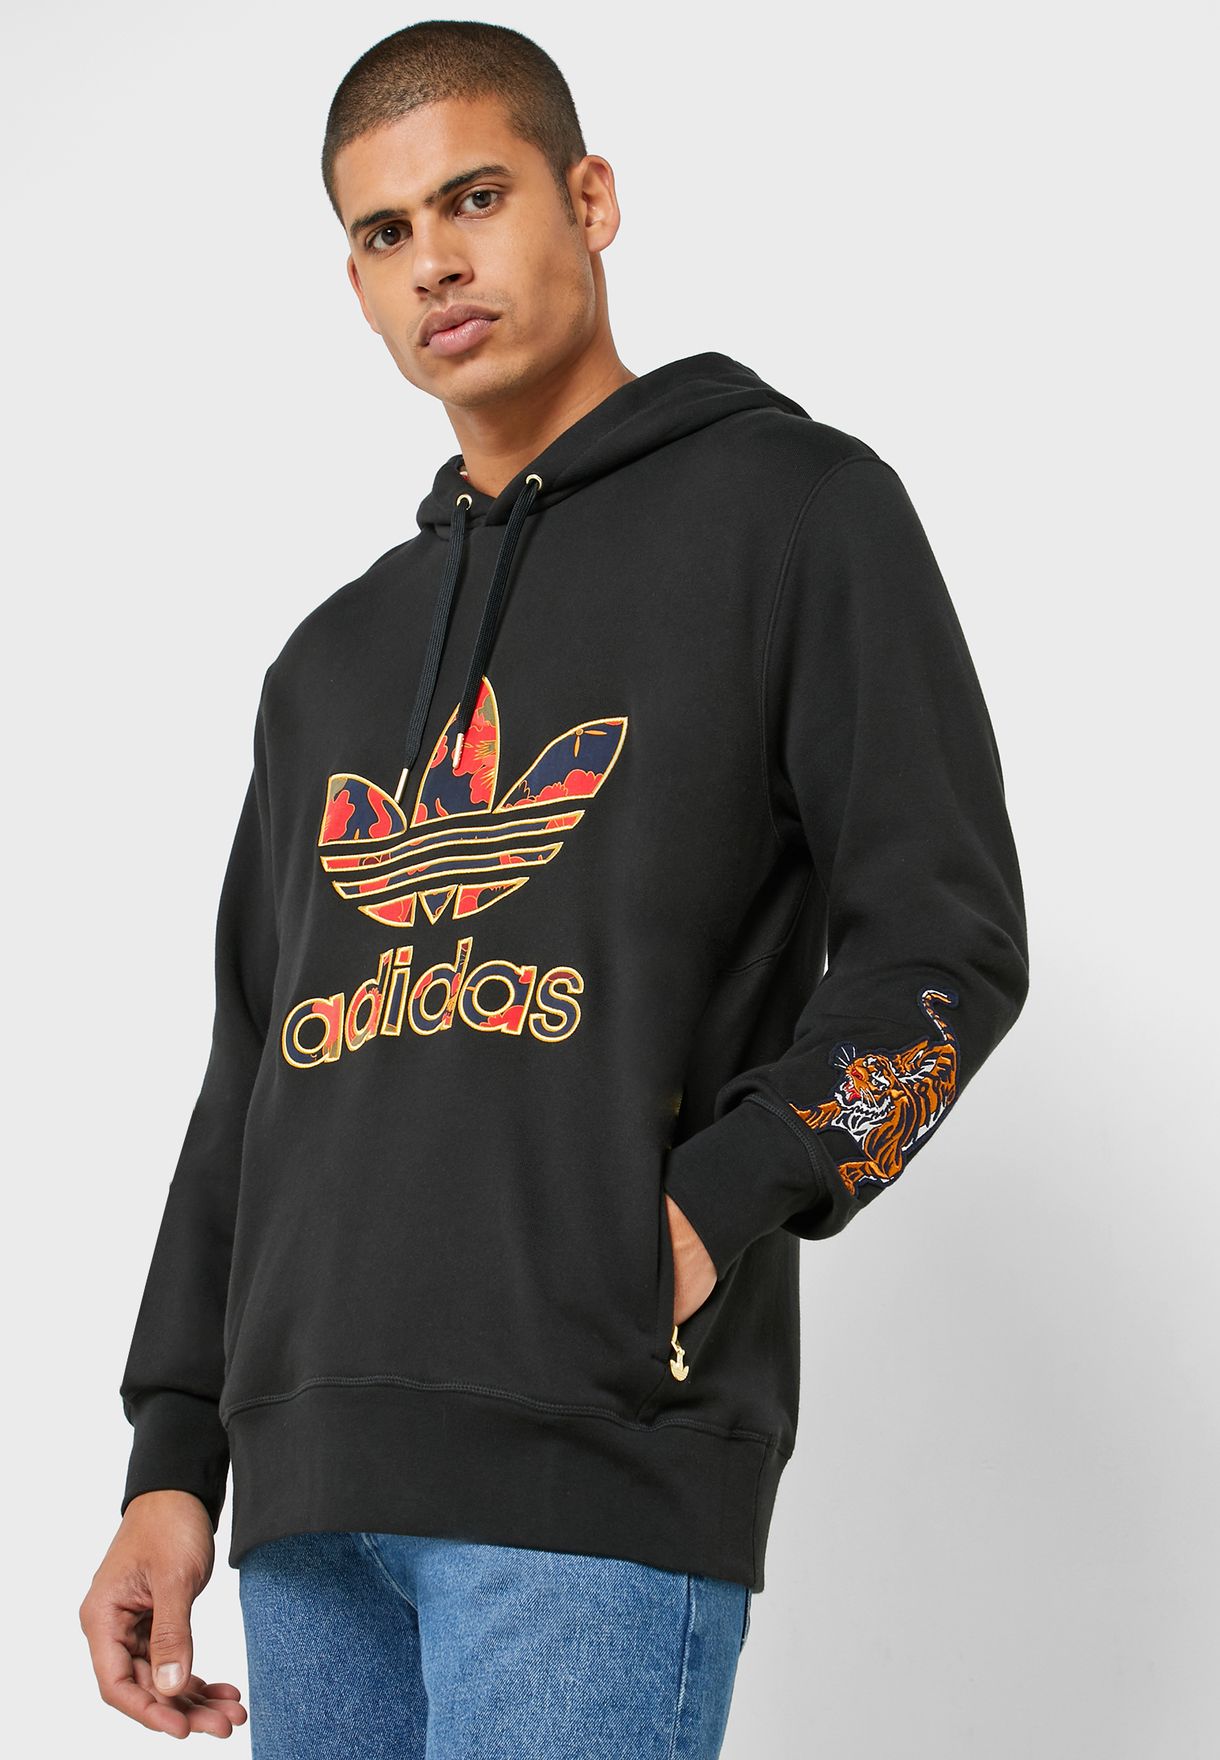 adidas hoodie new collection